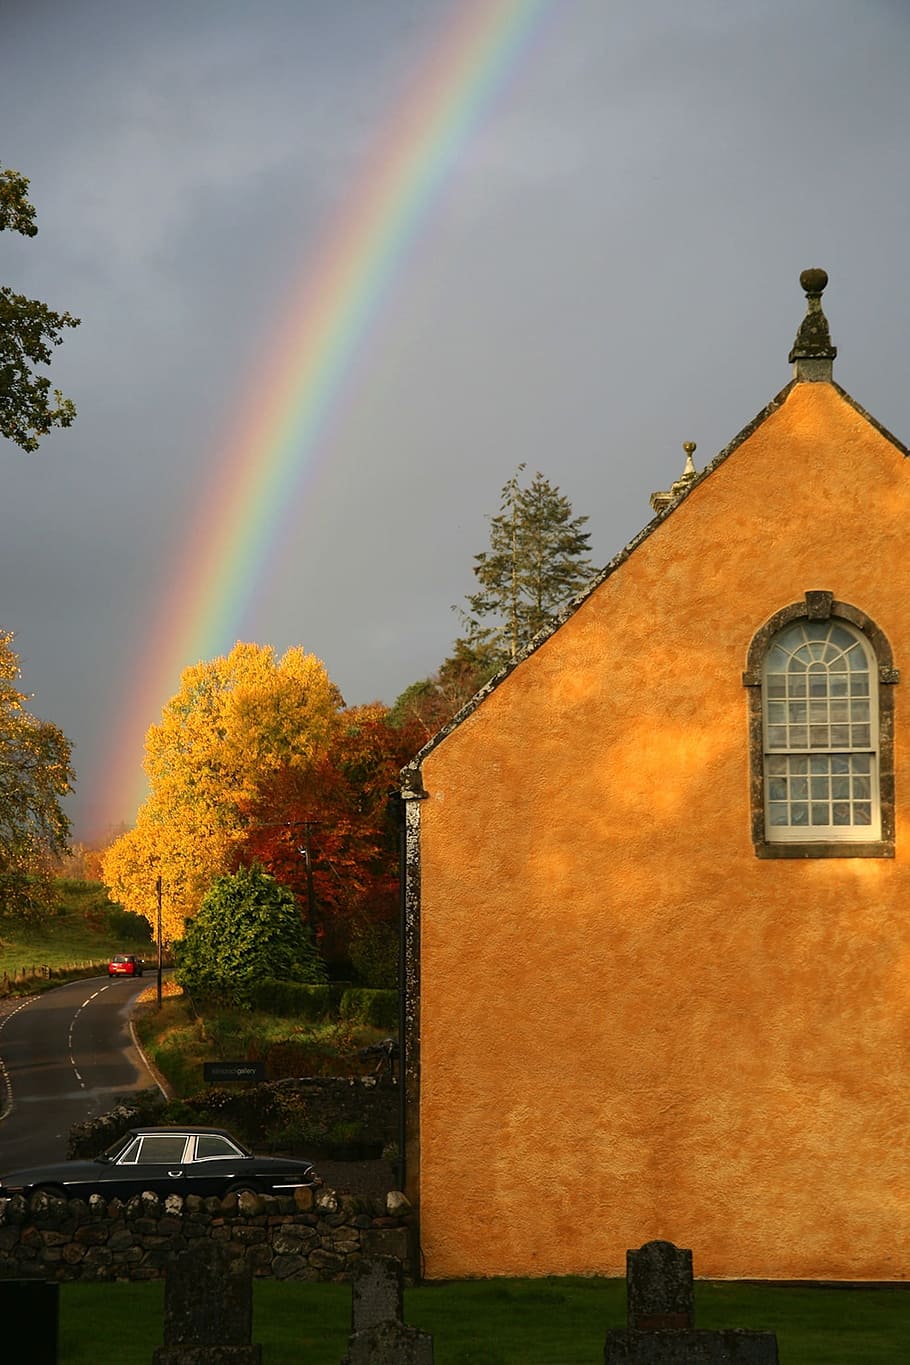 Rainbow, Building, House, Fall, Autumn, colors, colorful, outside